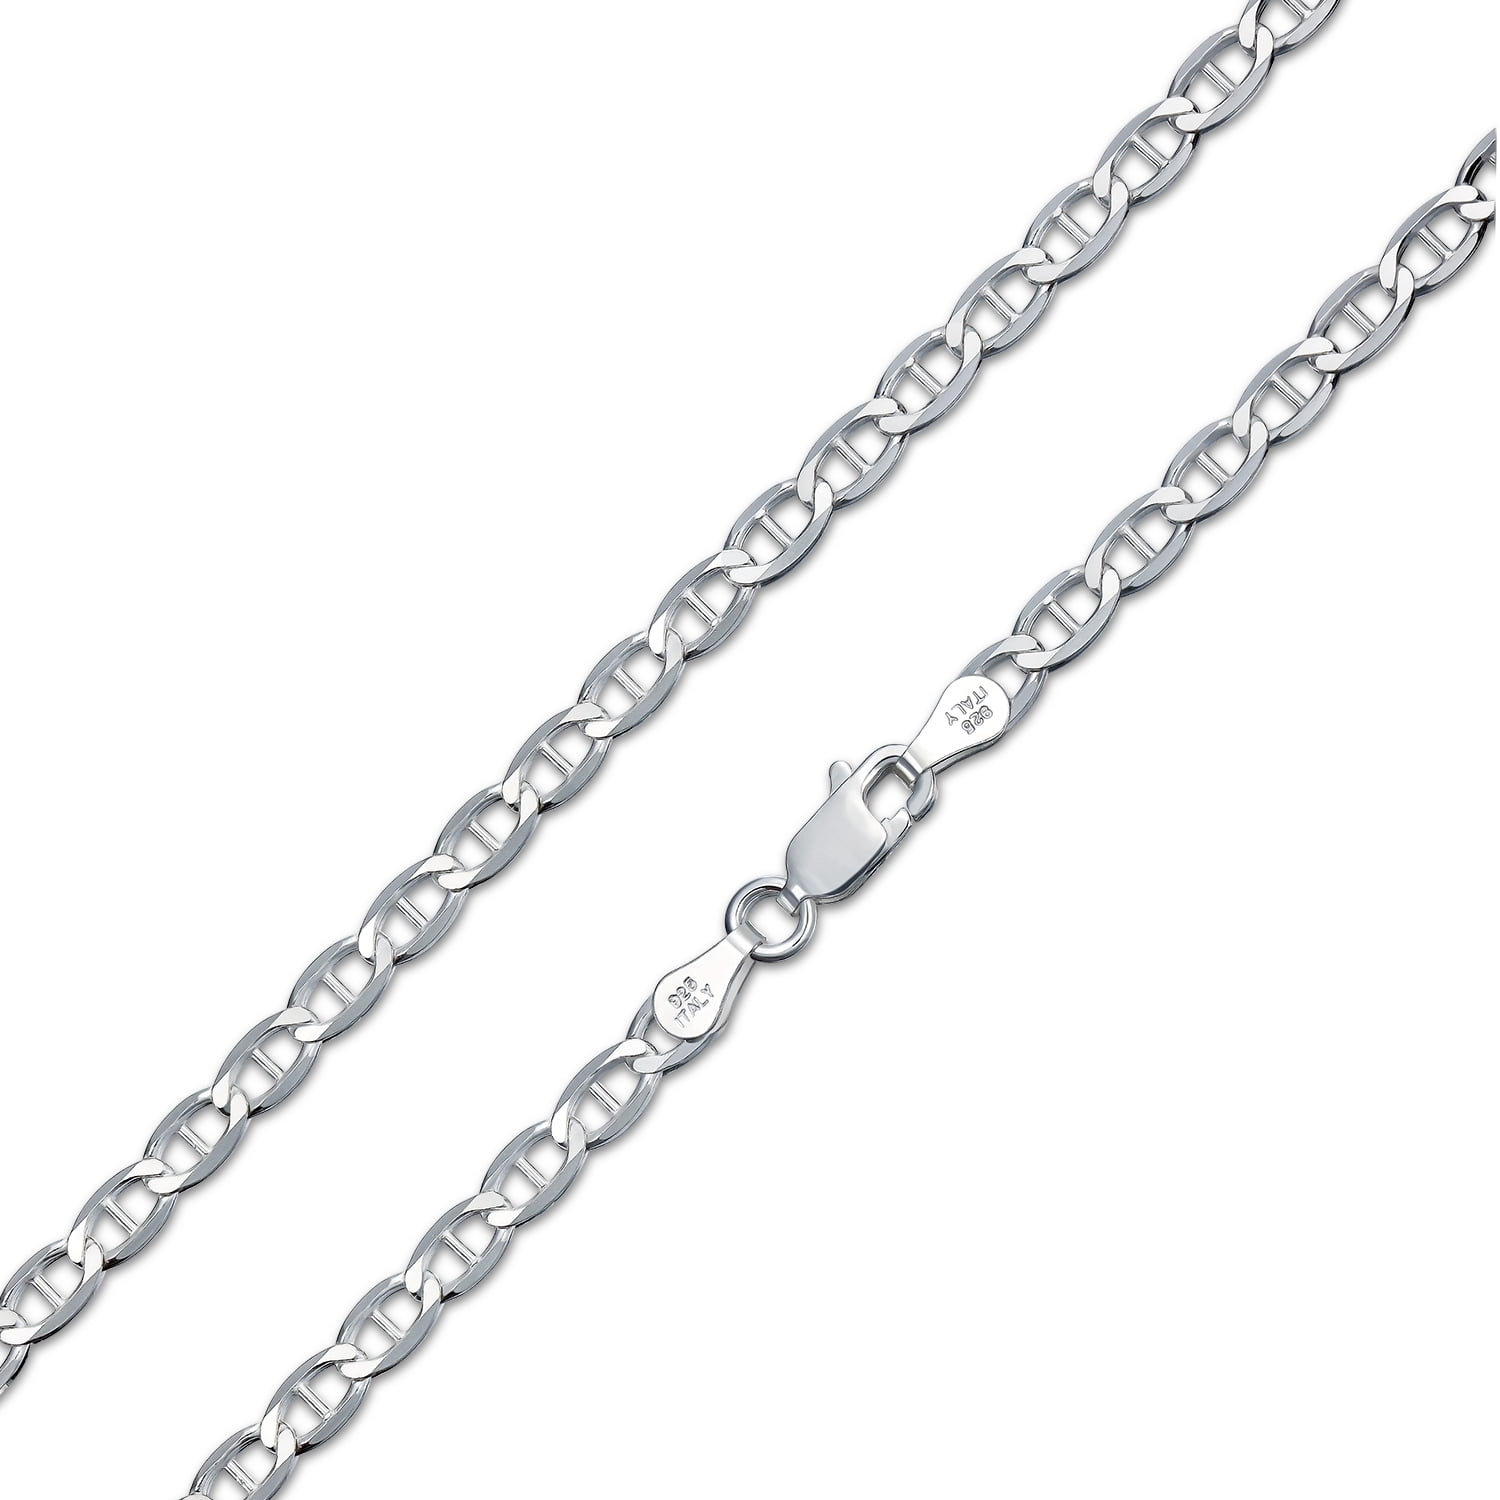 Strong 80 Gauge 925 Sterling Silver Solid Mariner Anchor Chain Necklace for Men for Women Made In Italy 16 Inch